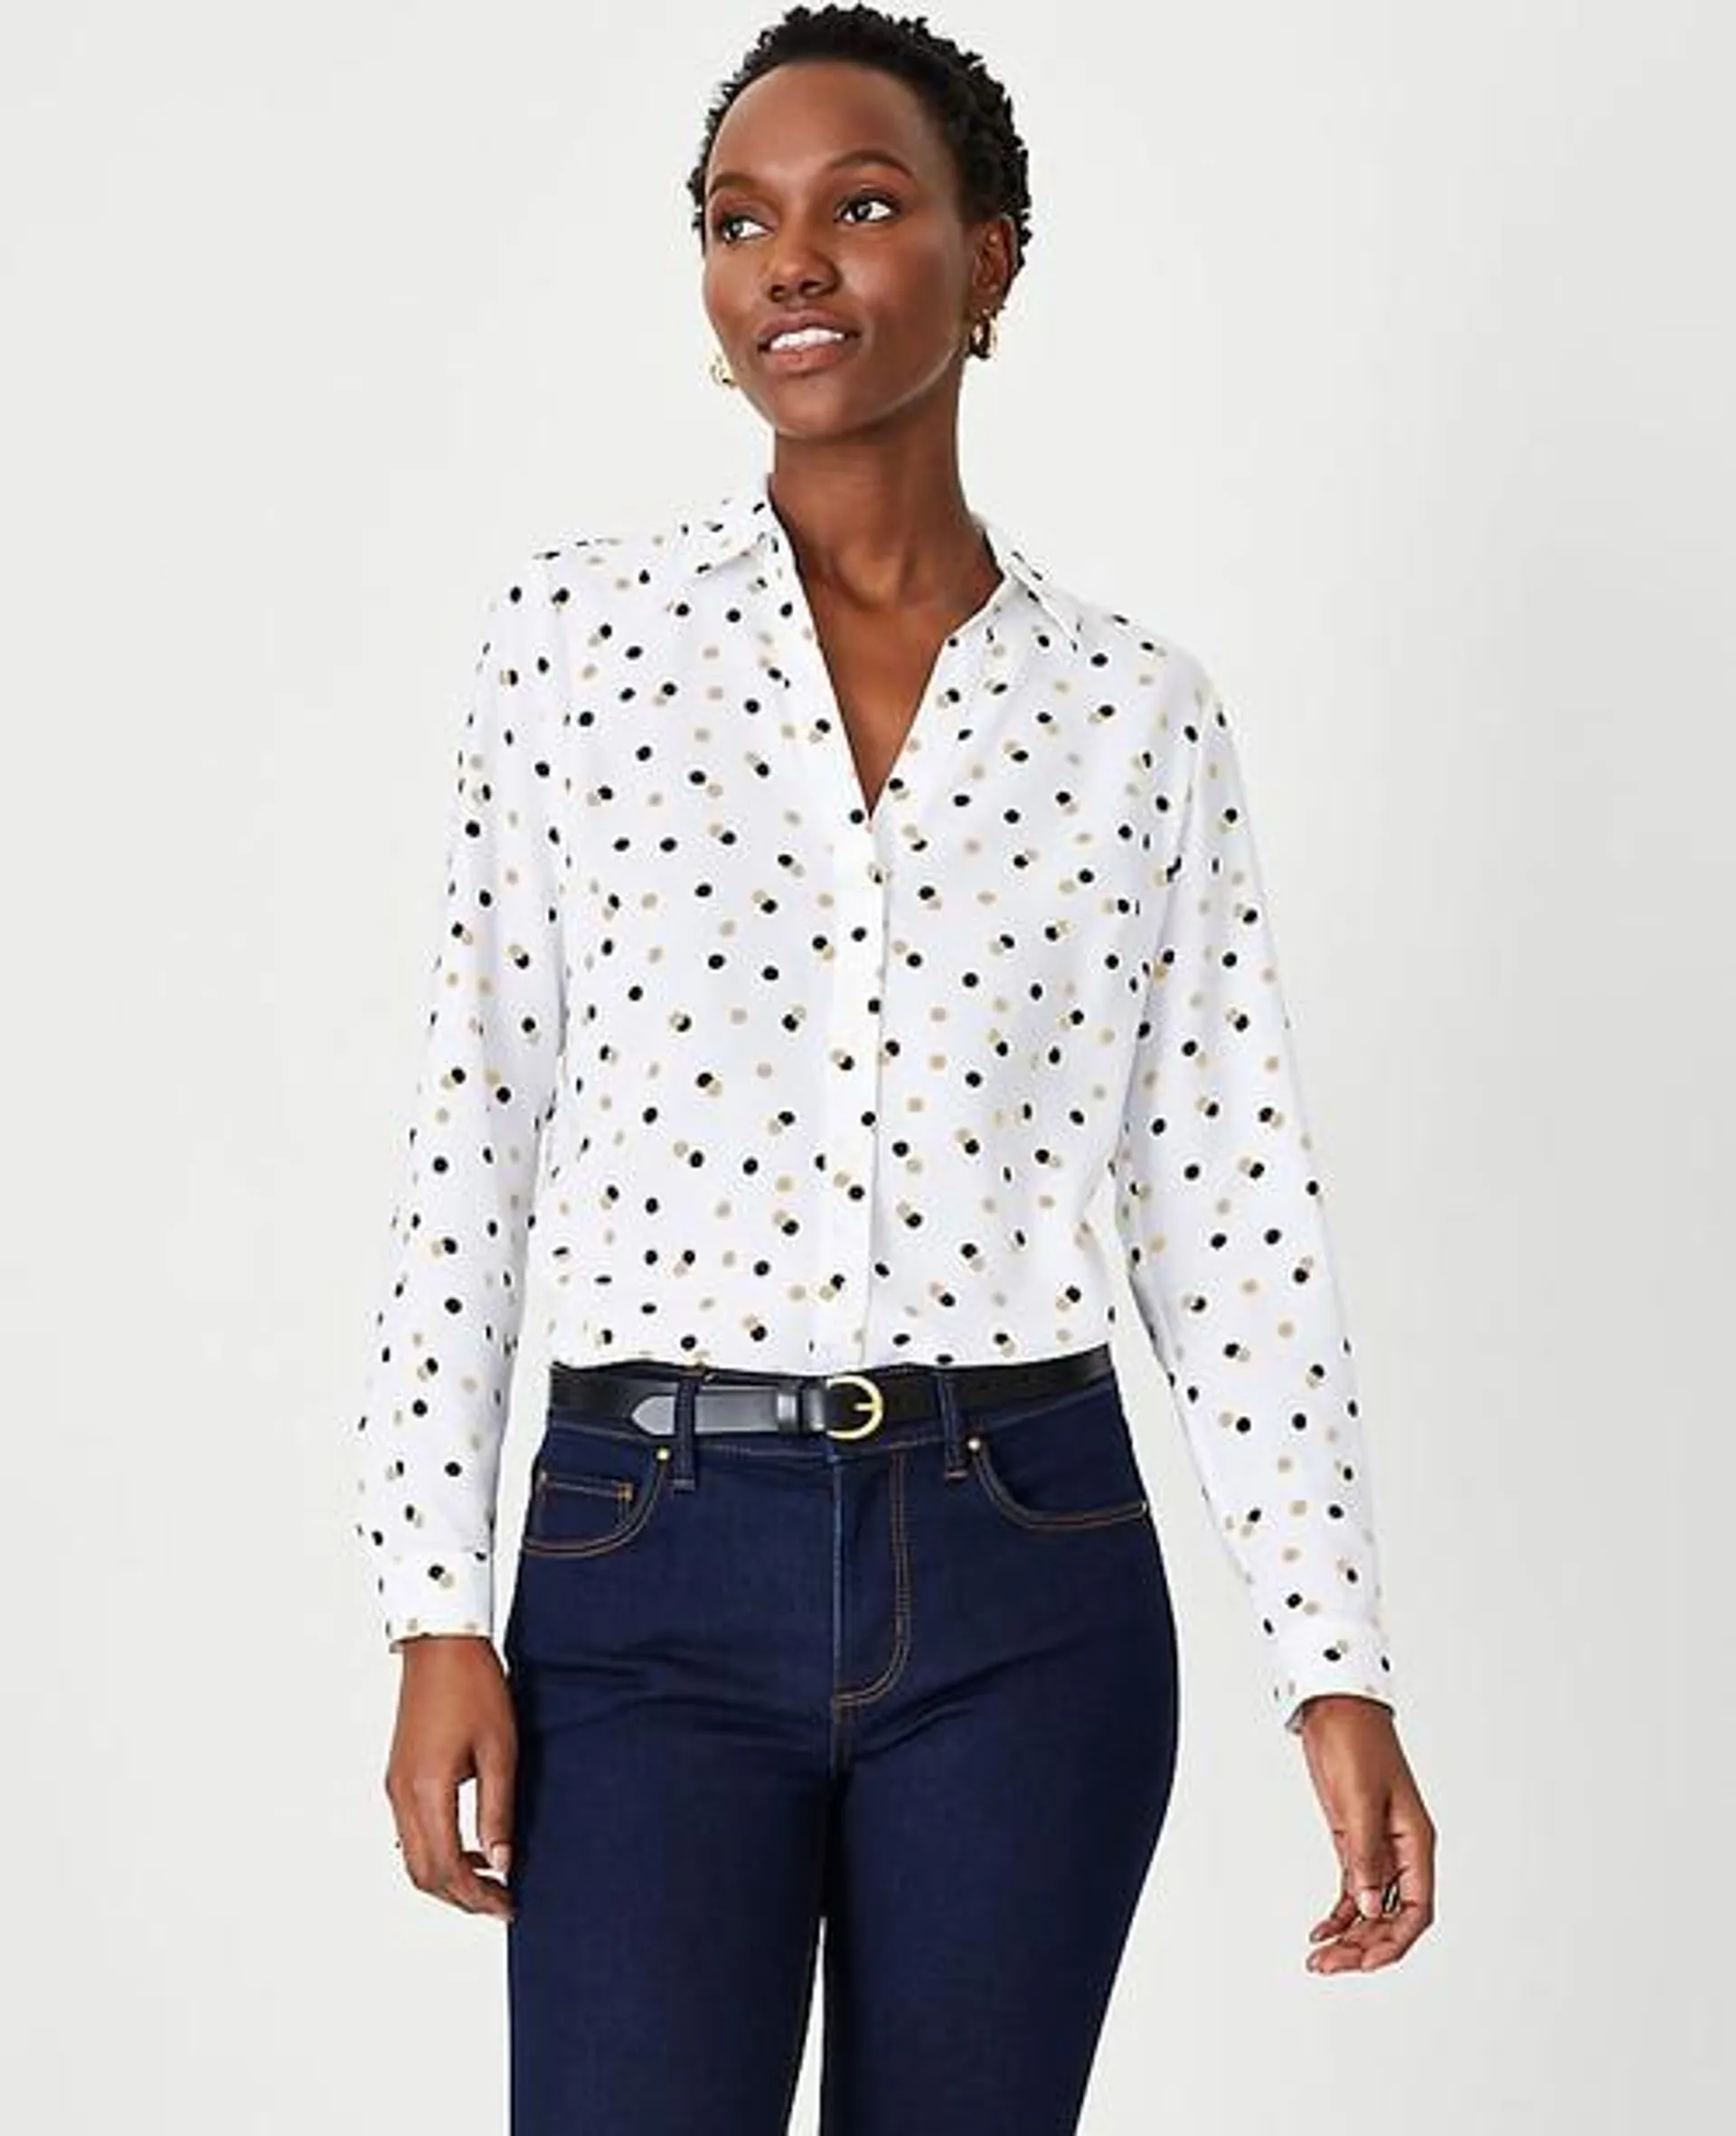 Camisas Ann Taylor Dotted Essential Blancos | 416529-RUT